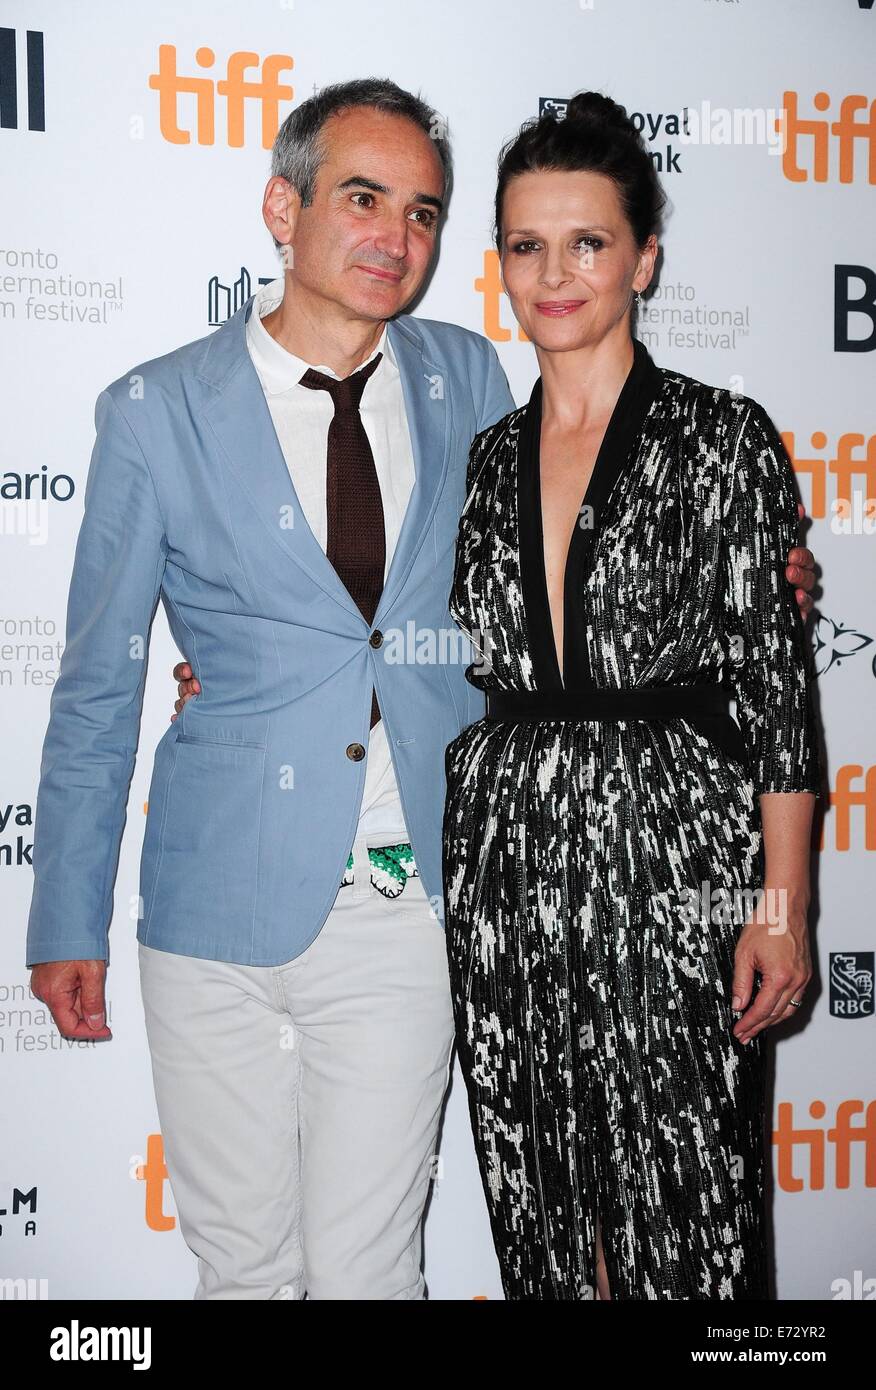 Toronto, ON. 4th Sep, 2014. Olivier Assayas, Juliette Binoche at arrivals for CLOUDS OF SILS MARIA Premiere at the Toronto International Film Festival 2014, Princess of Wales Theatre, Toronto, ON September 4, 2014. Credit:  Gregorio Binuya/Everett Collection/Alamy Live News Stock Photo